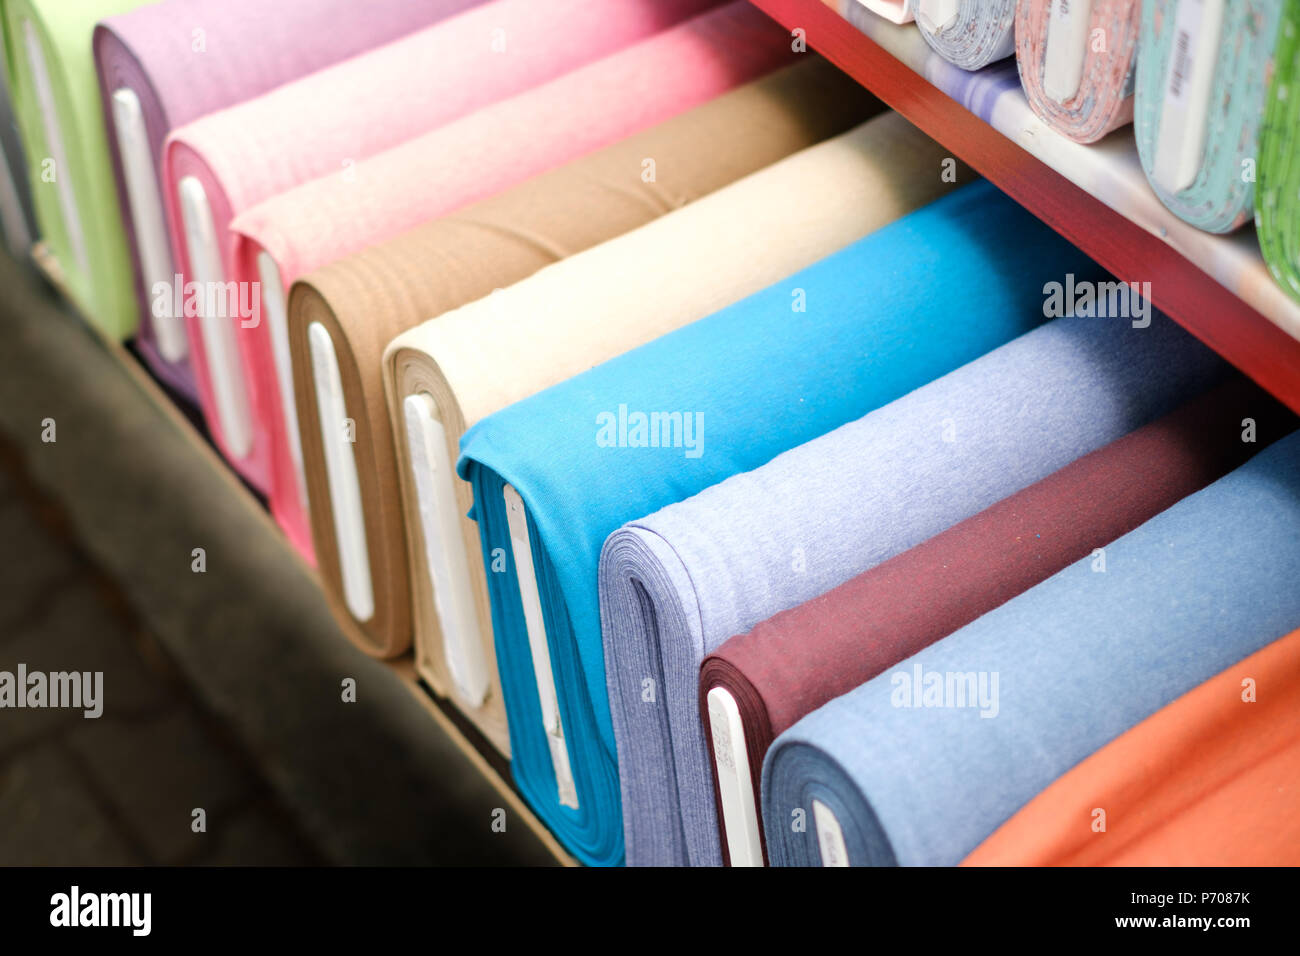 colorful fabric rolls on textile market Stock Photo